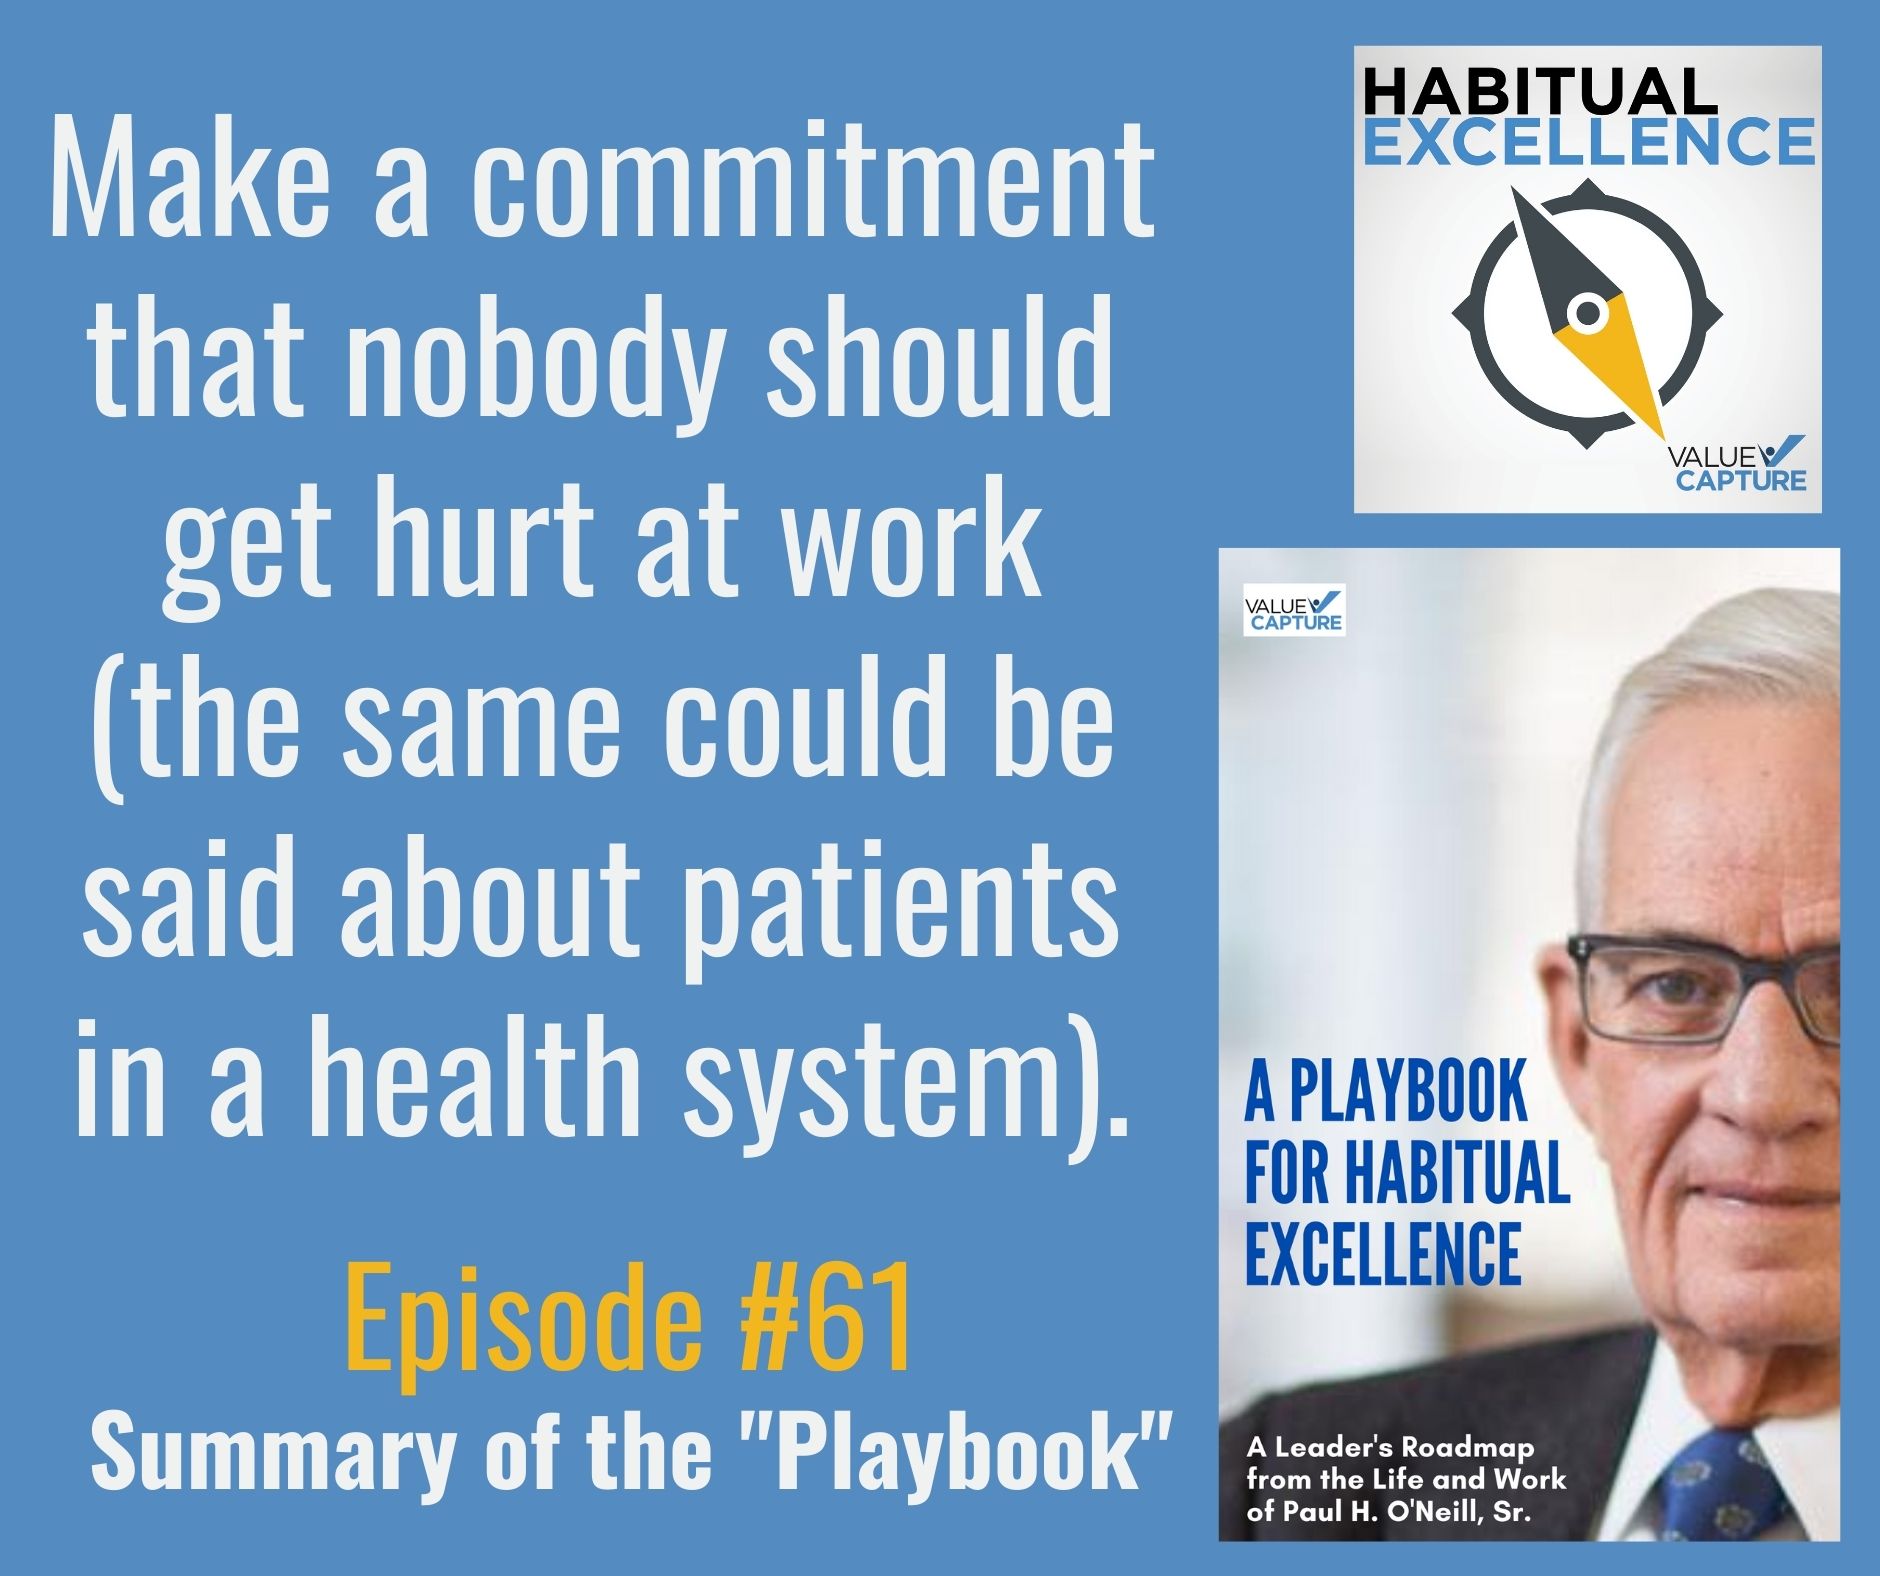 Make a commitment that nobody should get hurt at work (the same could be said about patients in a health system).